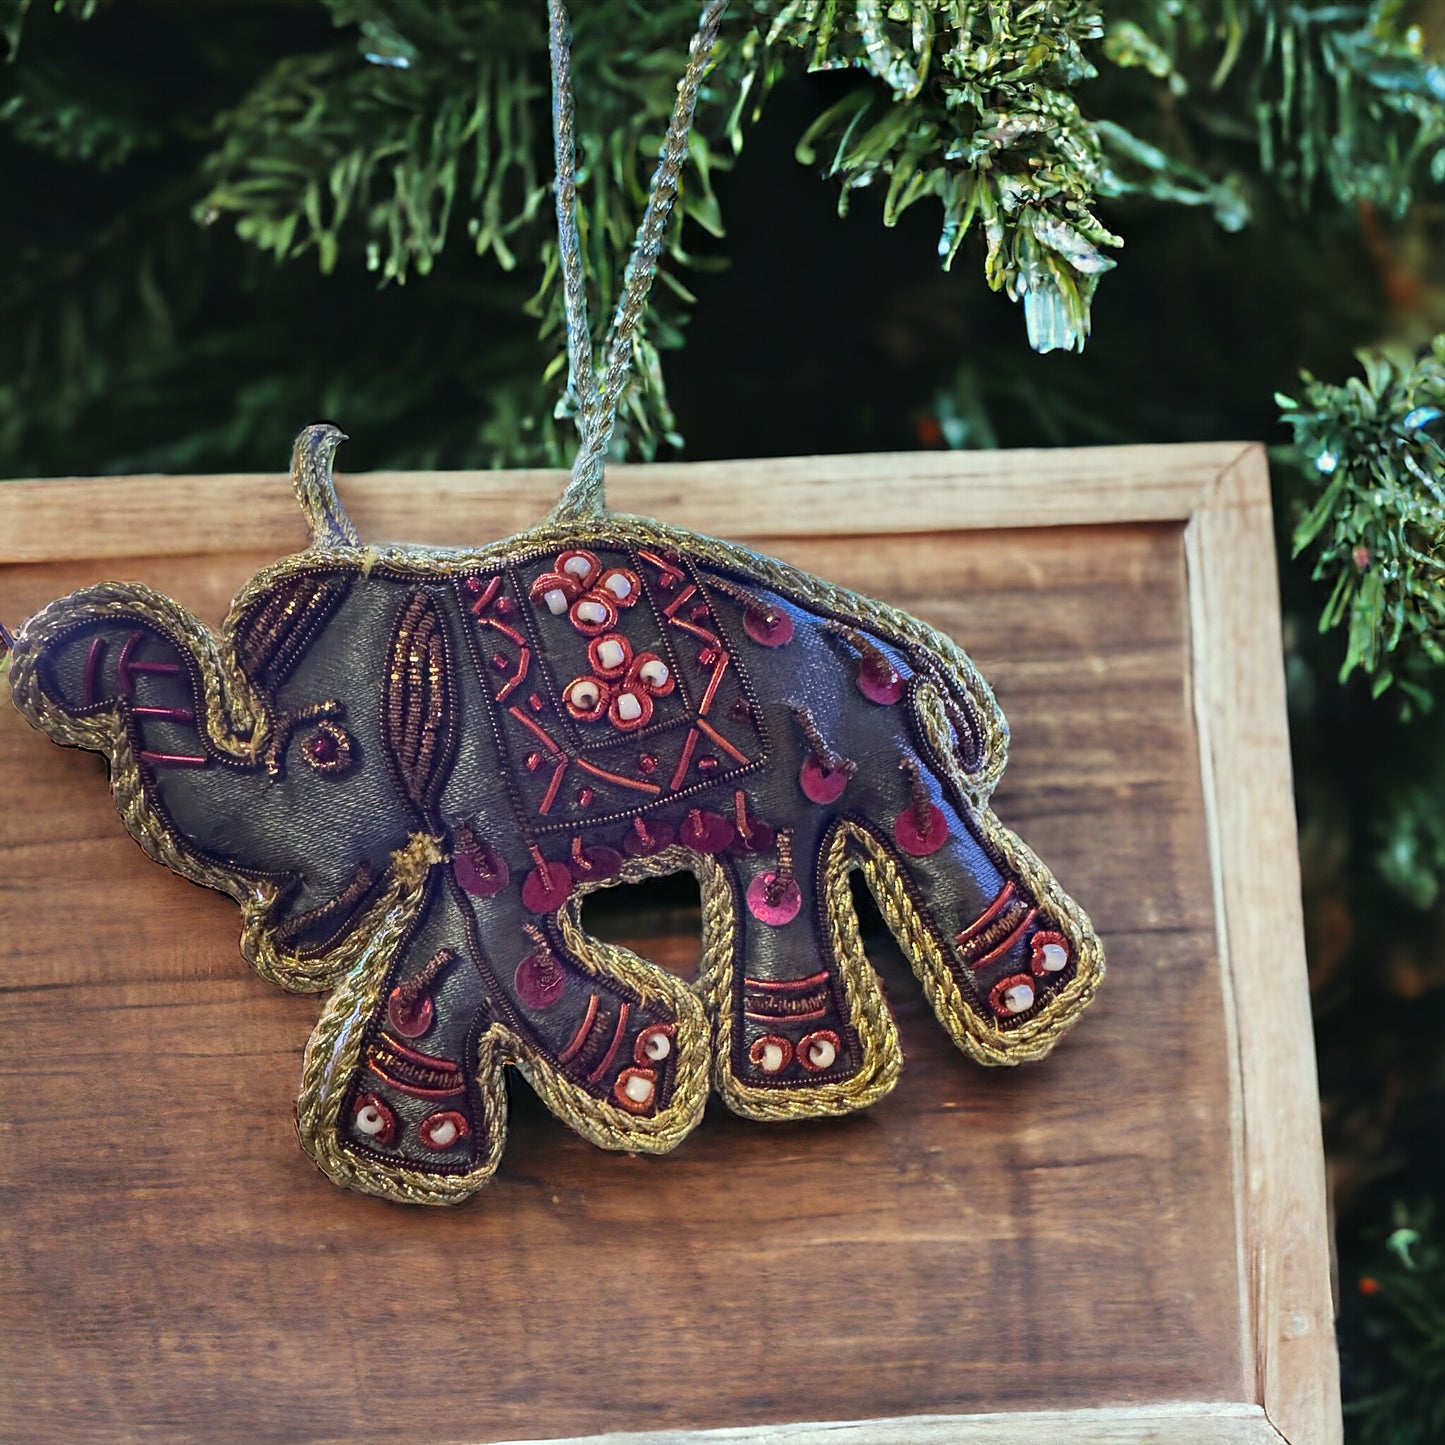 Indian Elephant Hand Stitched Ornament with Zari Embroidery - Tortuna